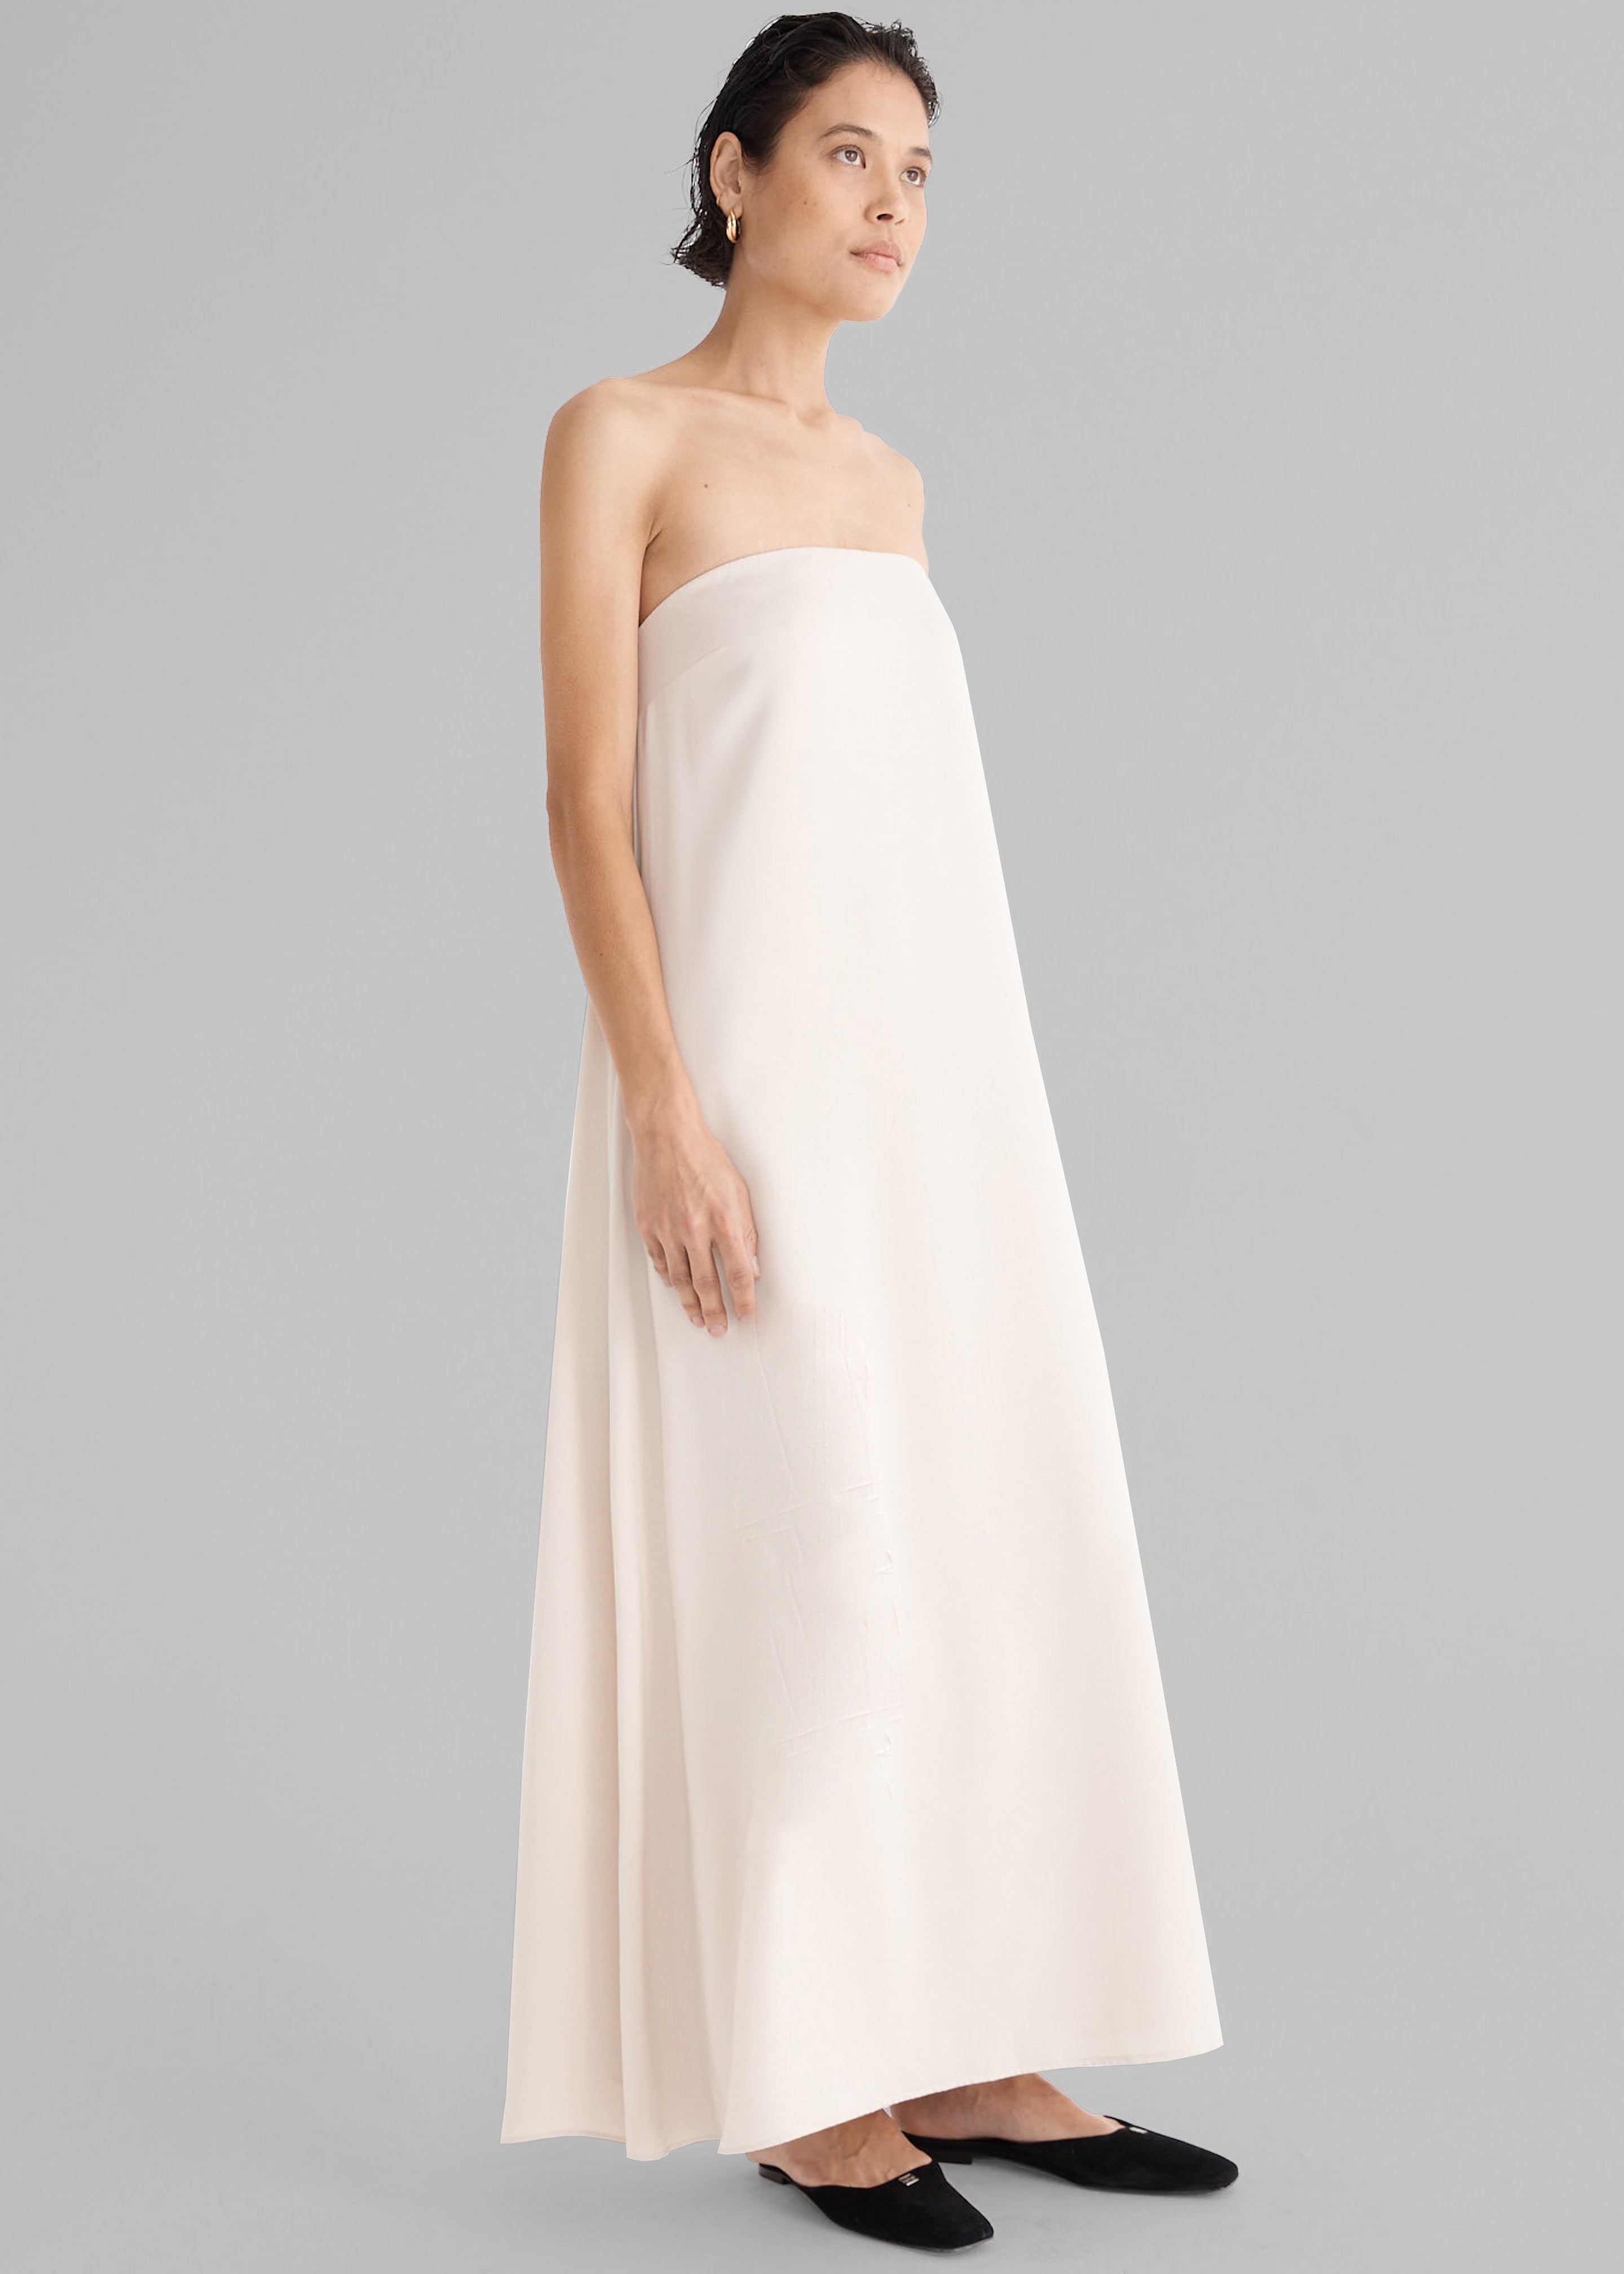 Solaqua The Fille Dress - Oyster - 4